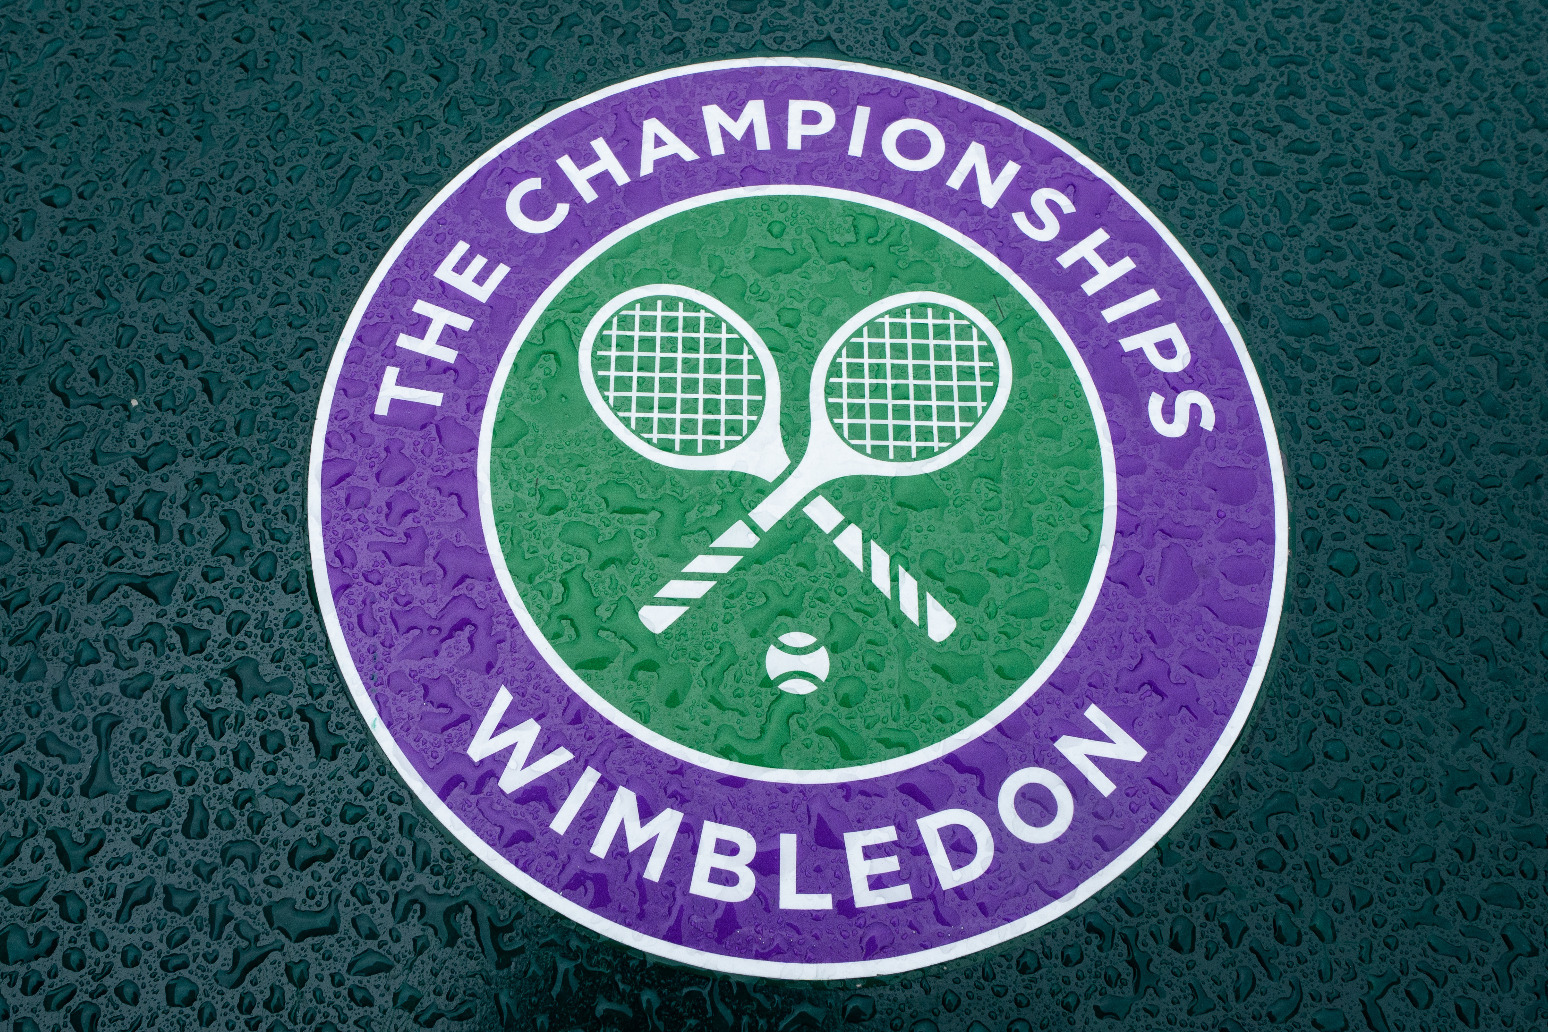 Wimbledon men’s doubles matches to be shortened to best-of-three sets 